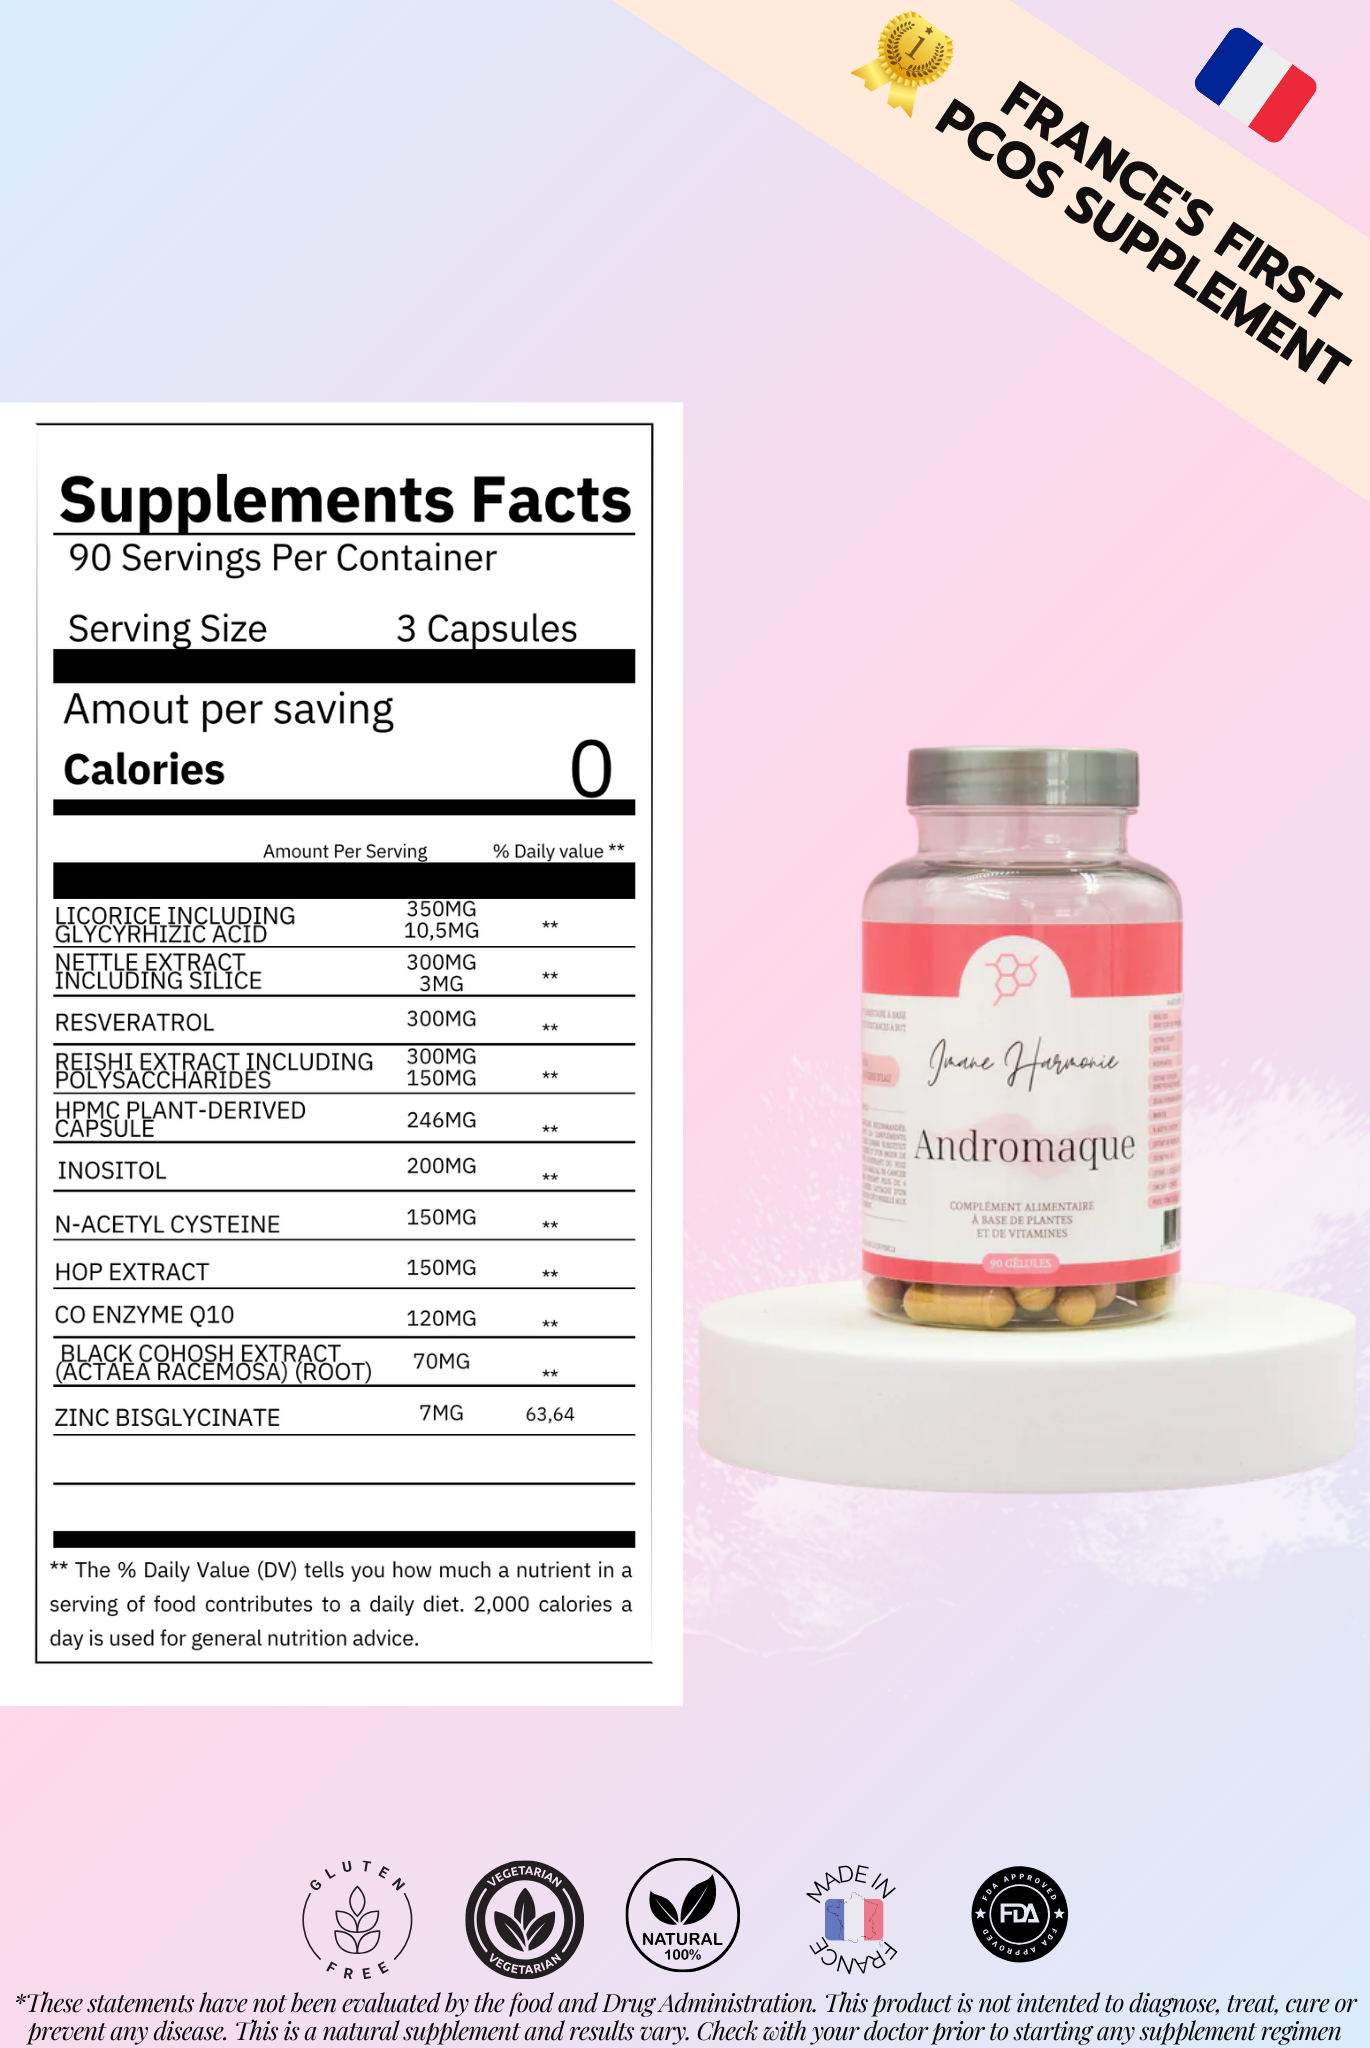 Supplements facts of Andromaque